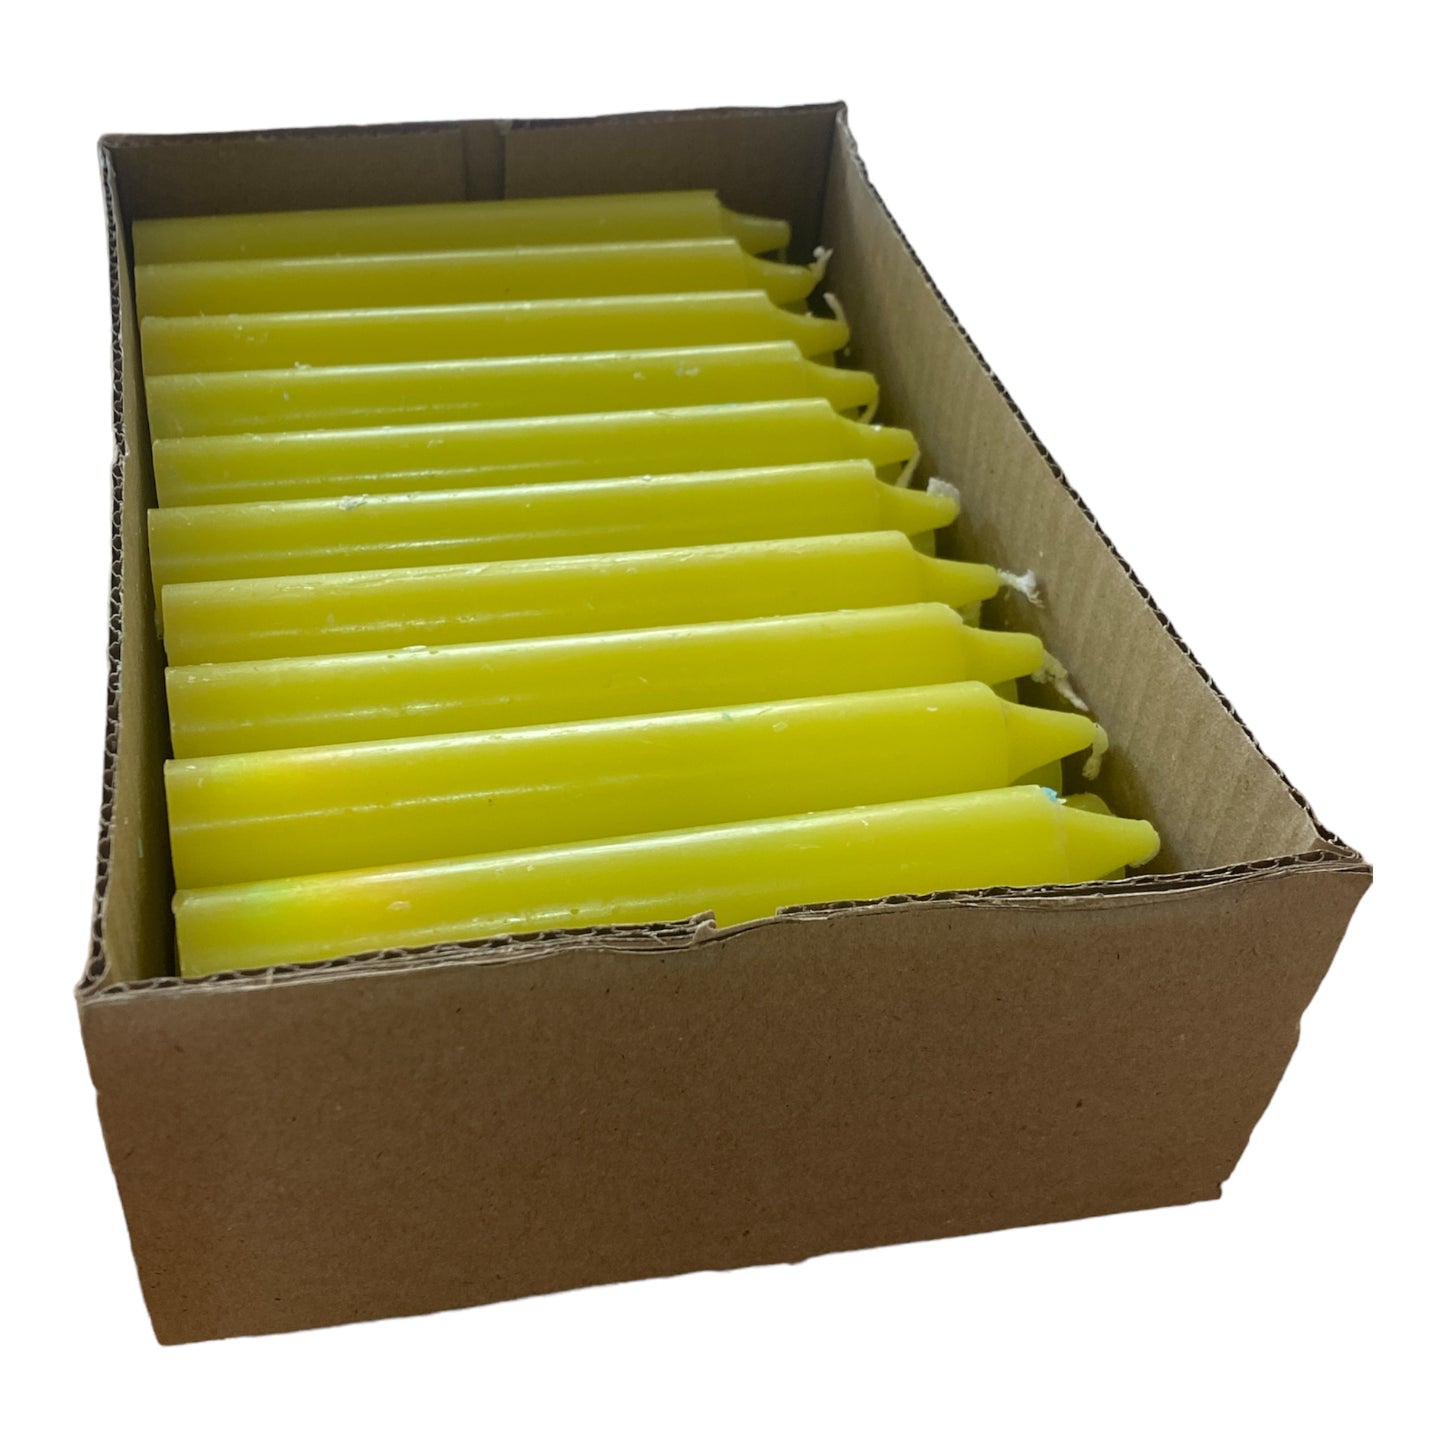 Box of 30 Yellow Candles - 15cm